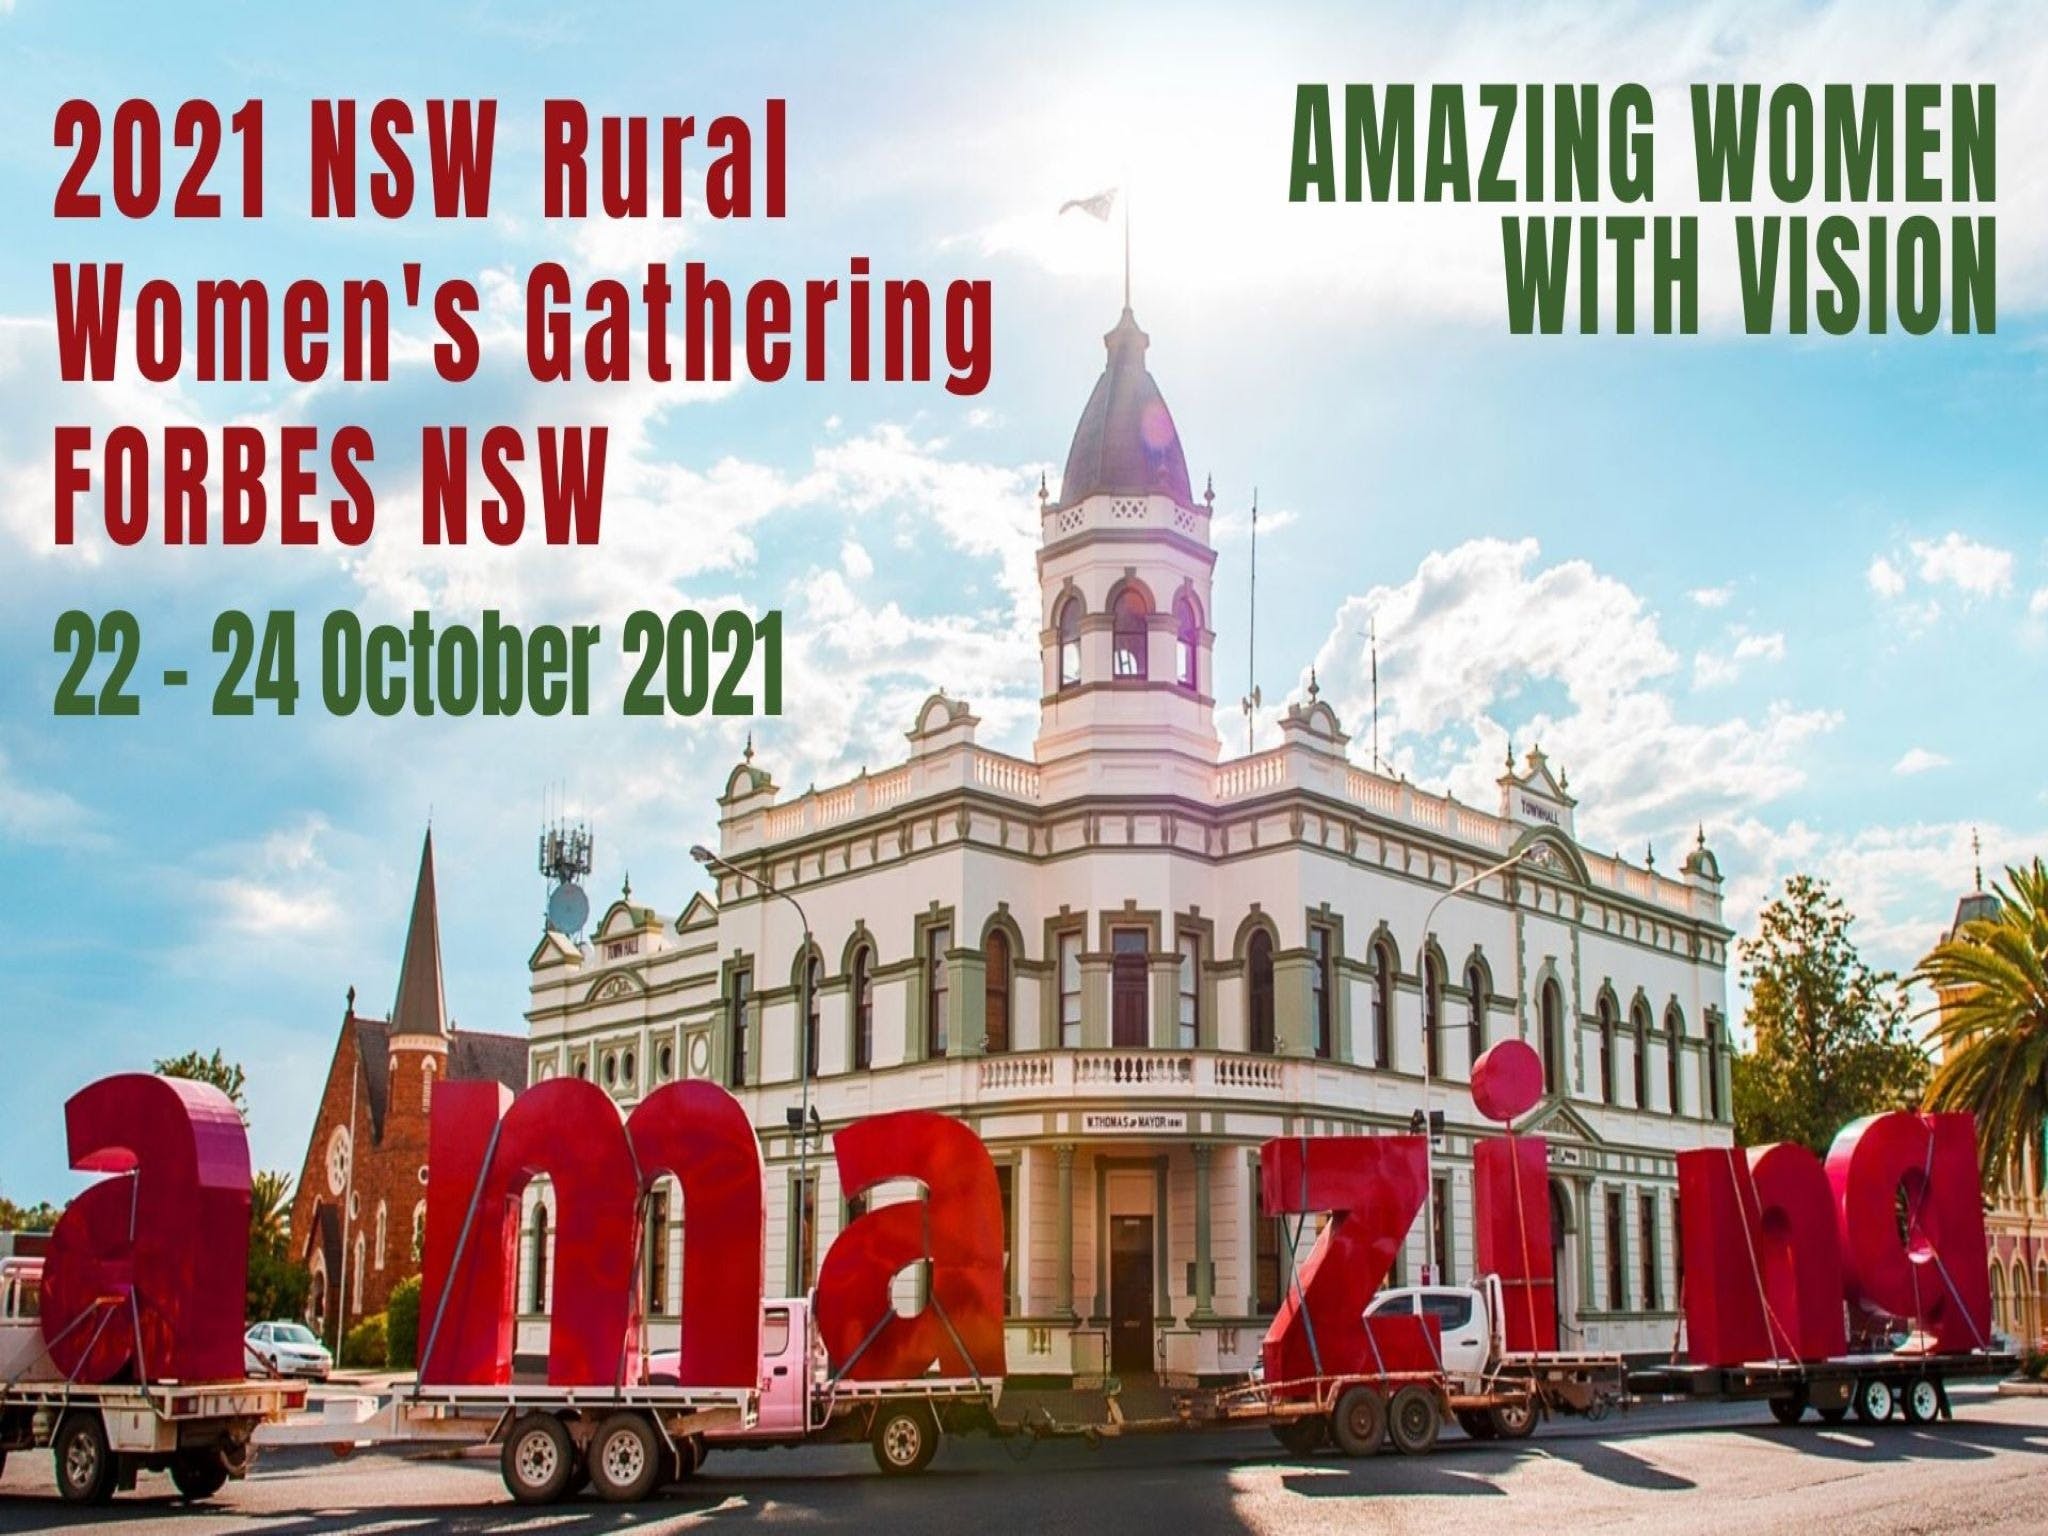 Forbes NSW Rural Women's Gathering - Pubs Sydney